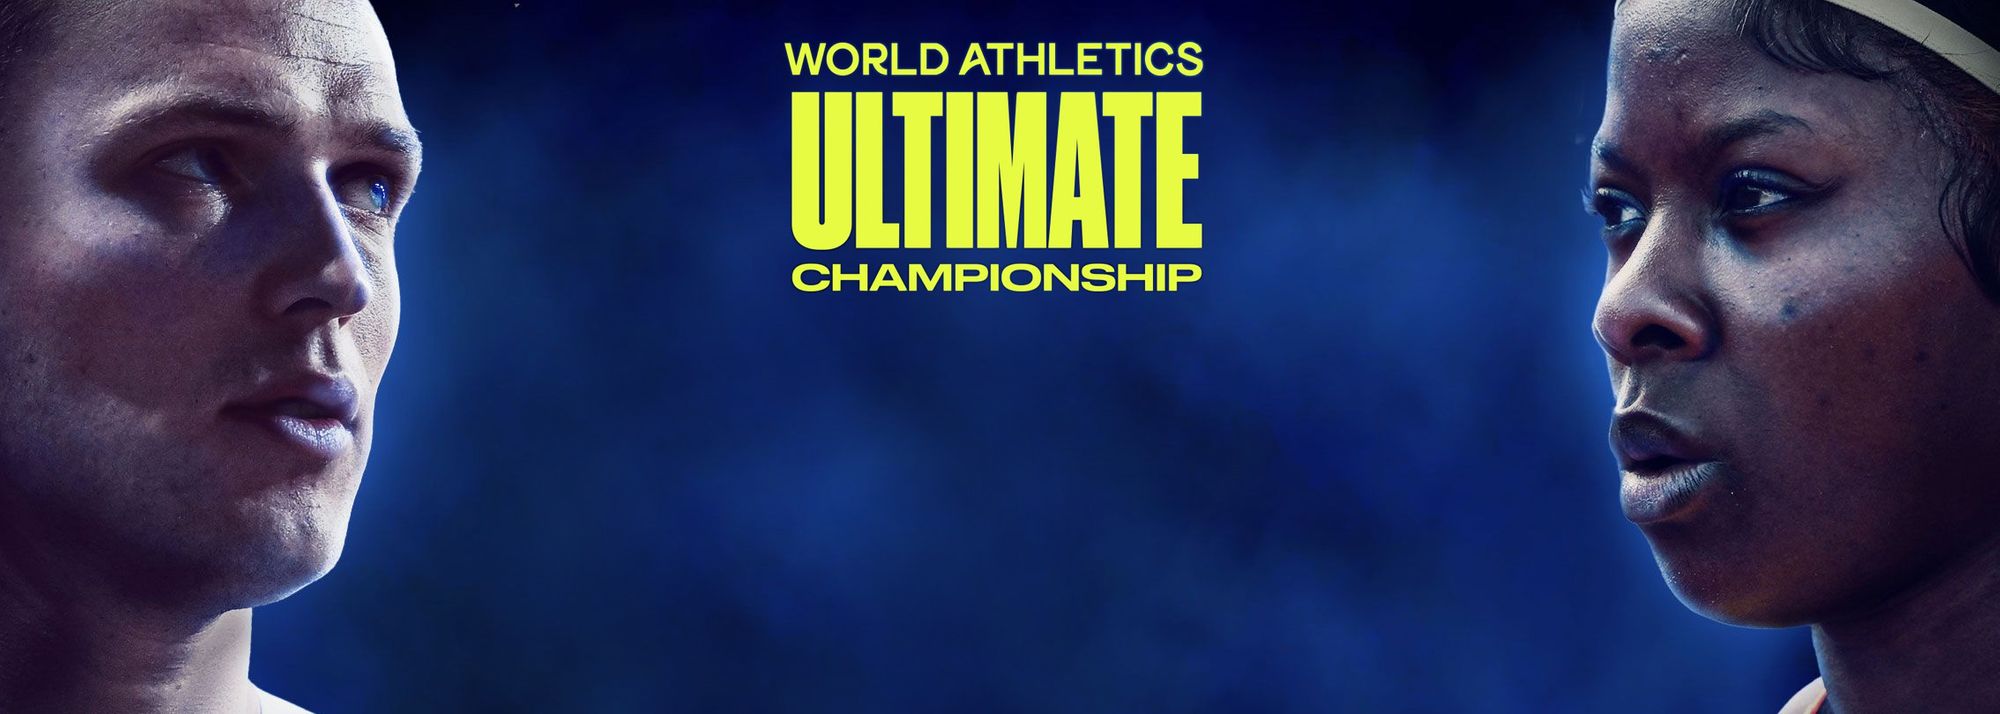 World Athletics announces new global championship to conclude the 2026 track and field season